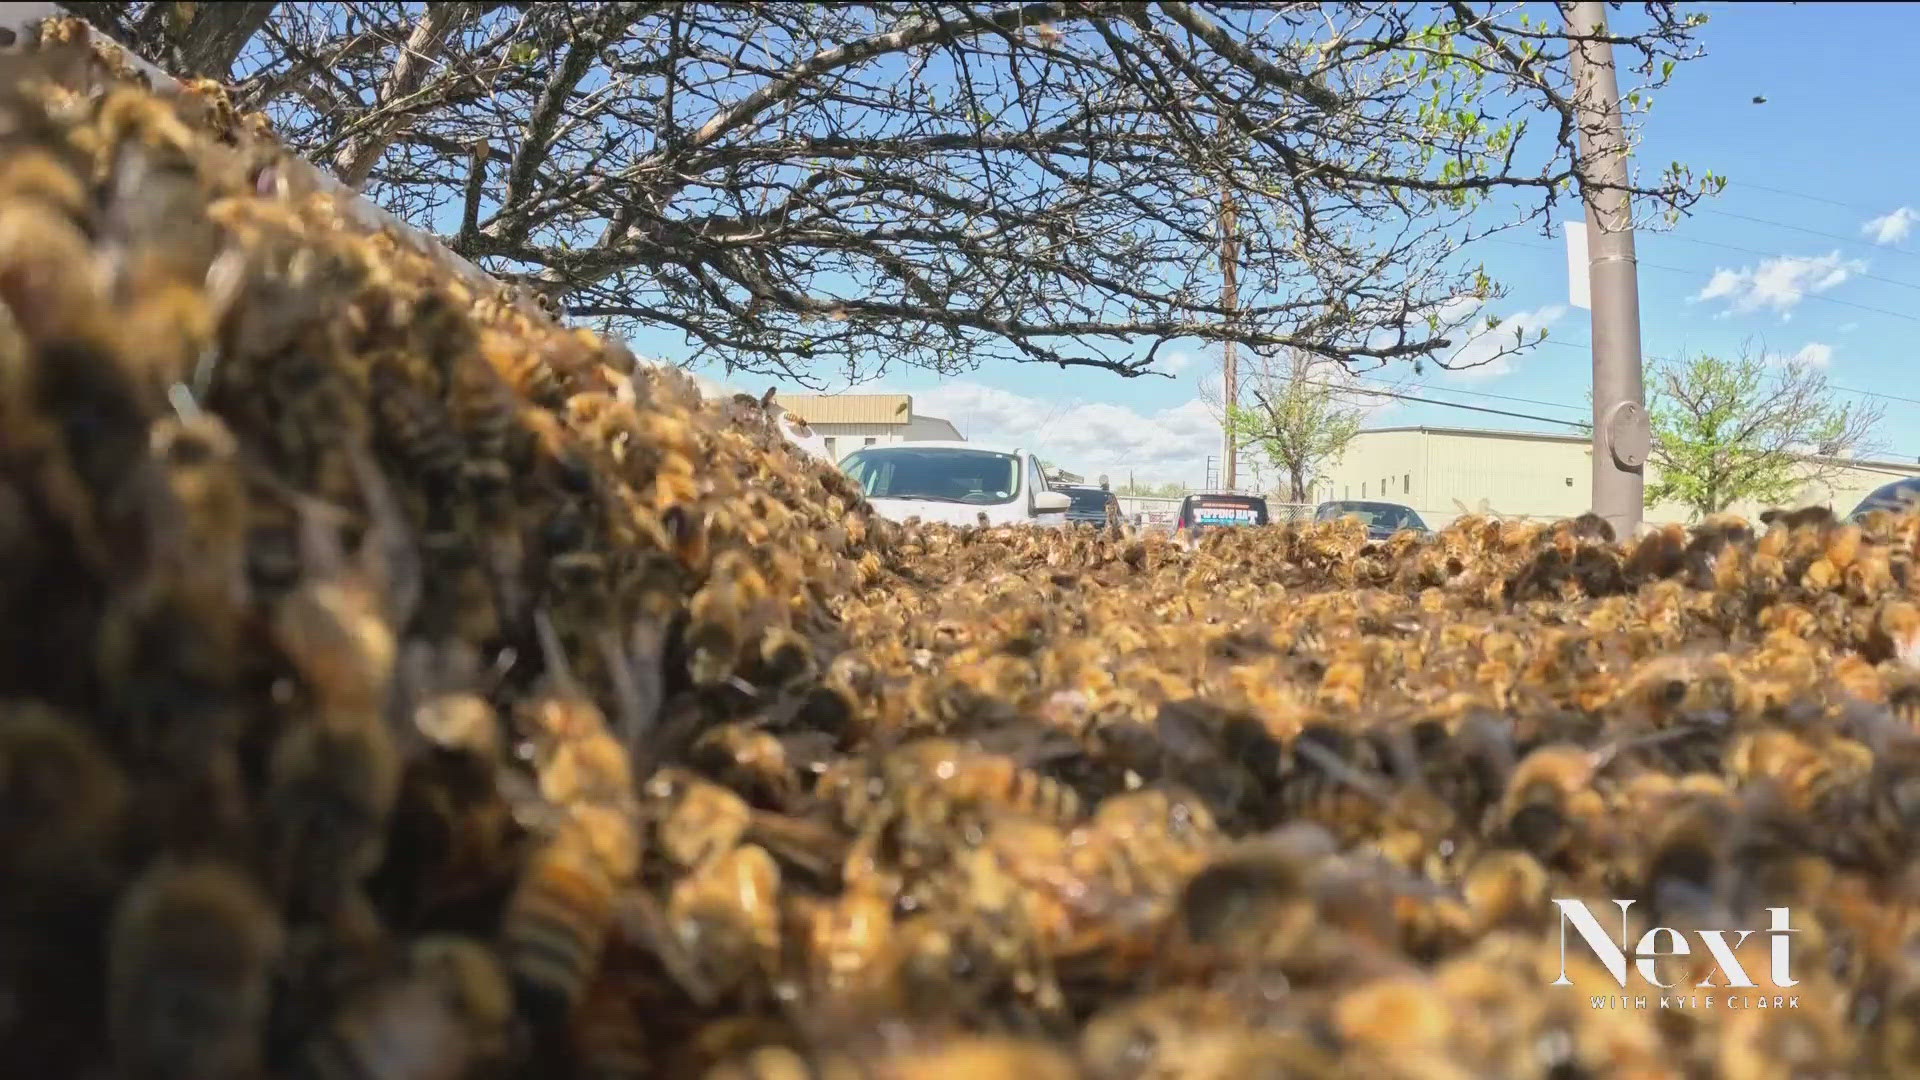 "Swarm season" has arrived about a month early, according to the Colorado Swarm Hotline. Is that good news for the state's struggling bee population?